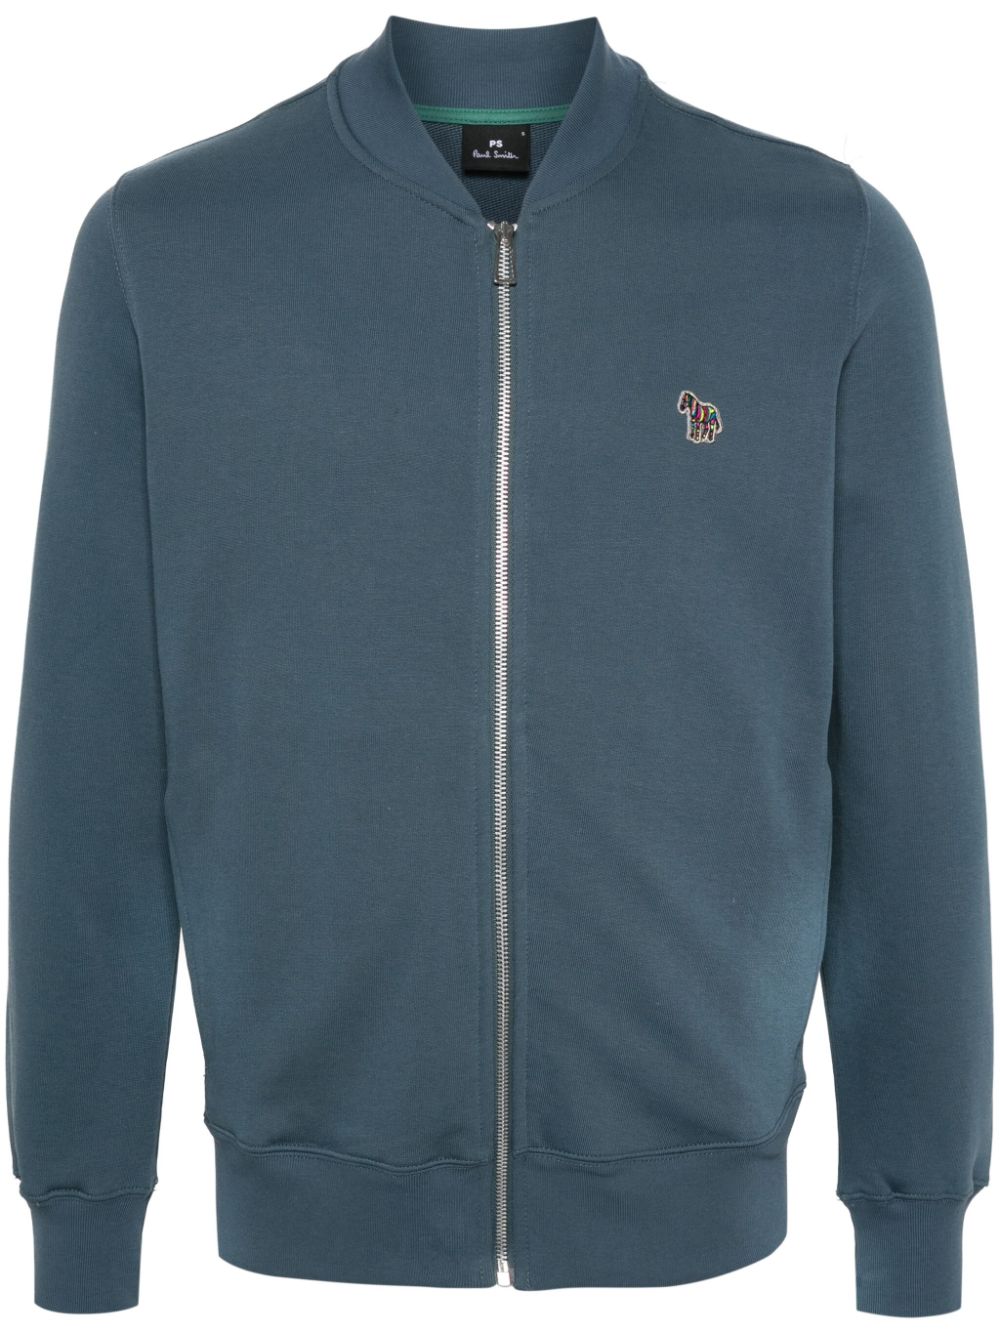 PS Paul Smith logo-embroidered zip-up sweatshirt - Blue von PS Paul Smith